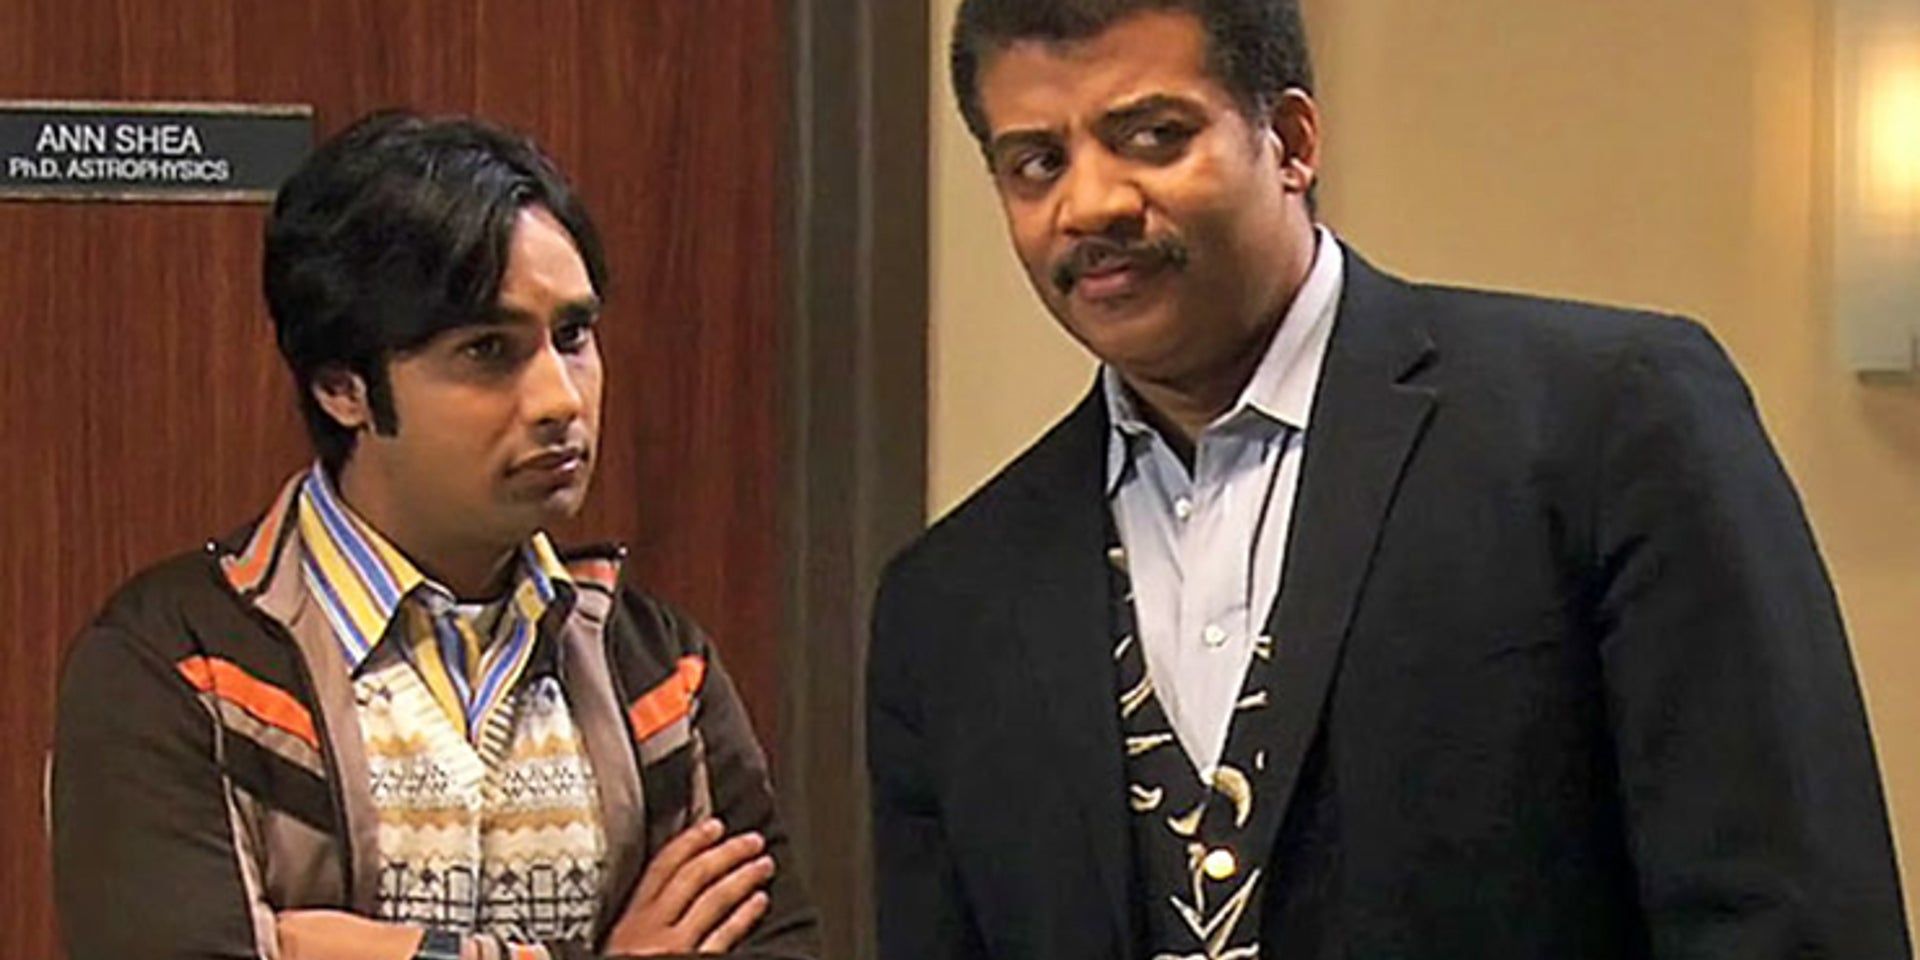 Astrophysicist Neil DeGrasse Tyson on The Big Bang Theory.